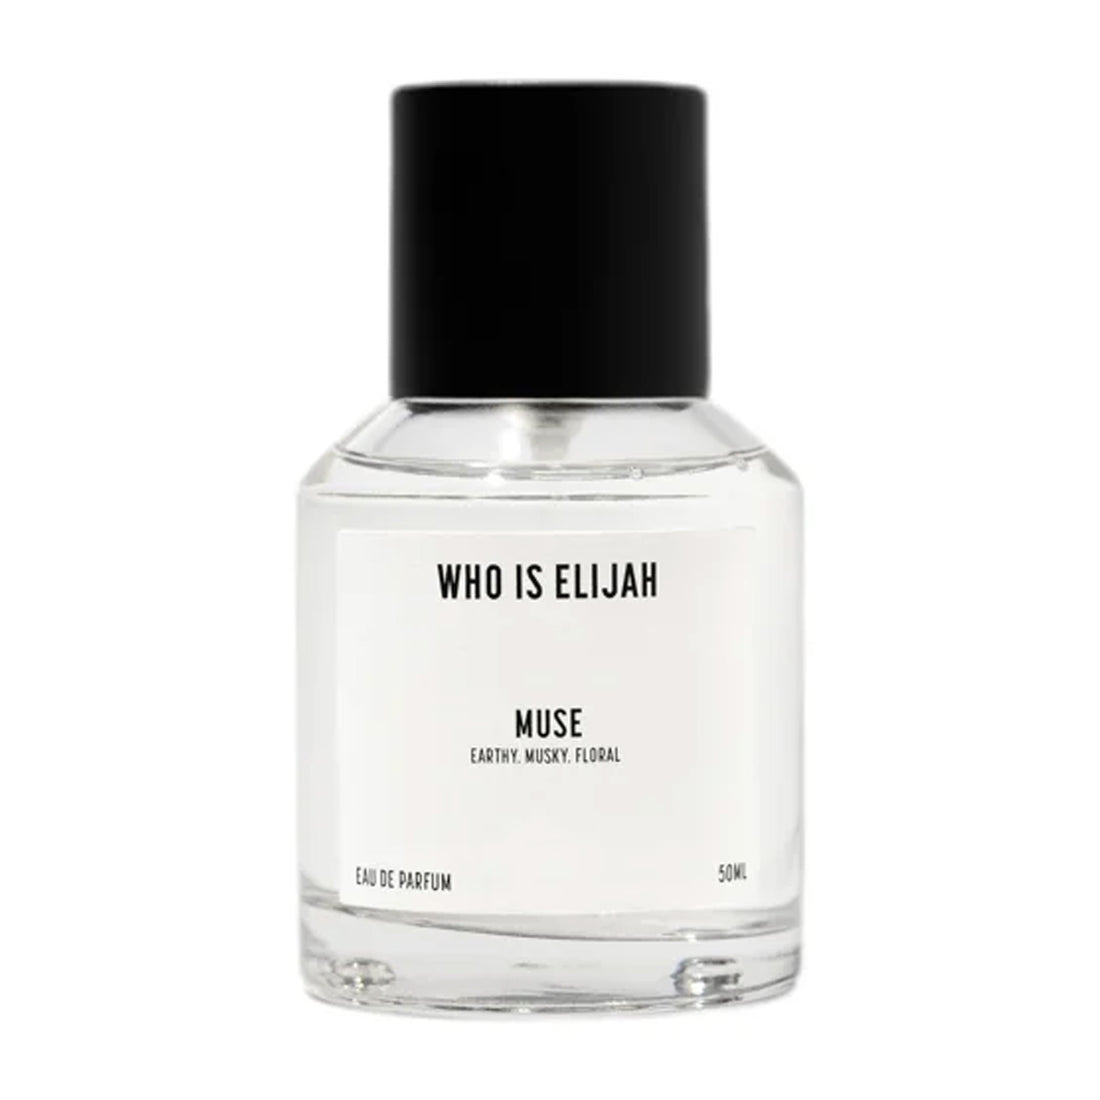 who is elijah MUSE 50ml